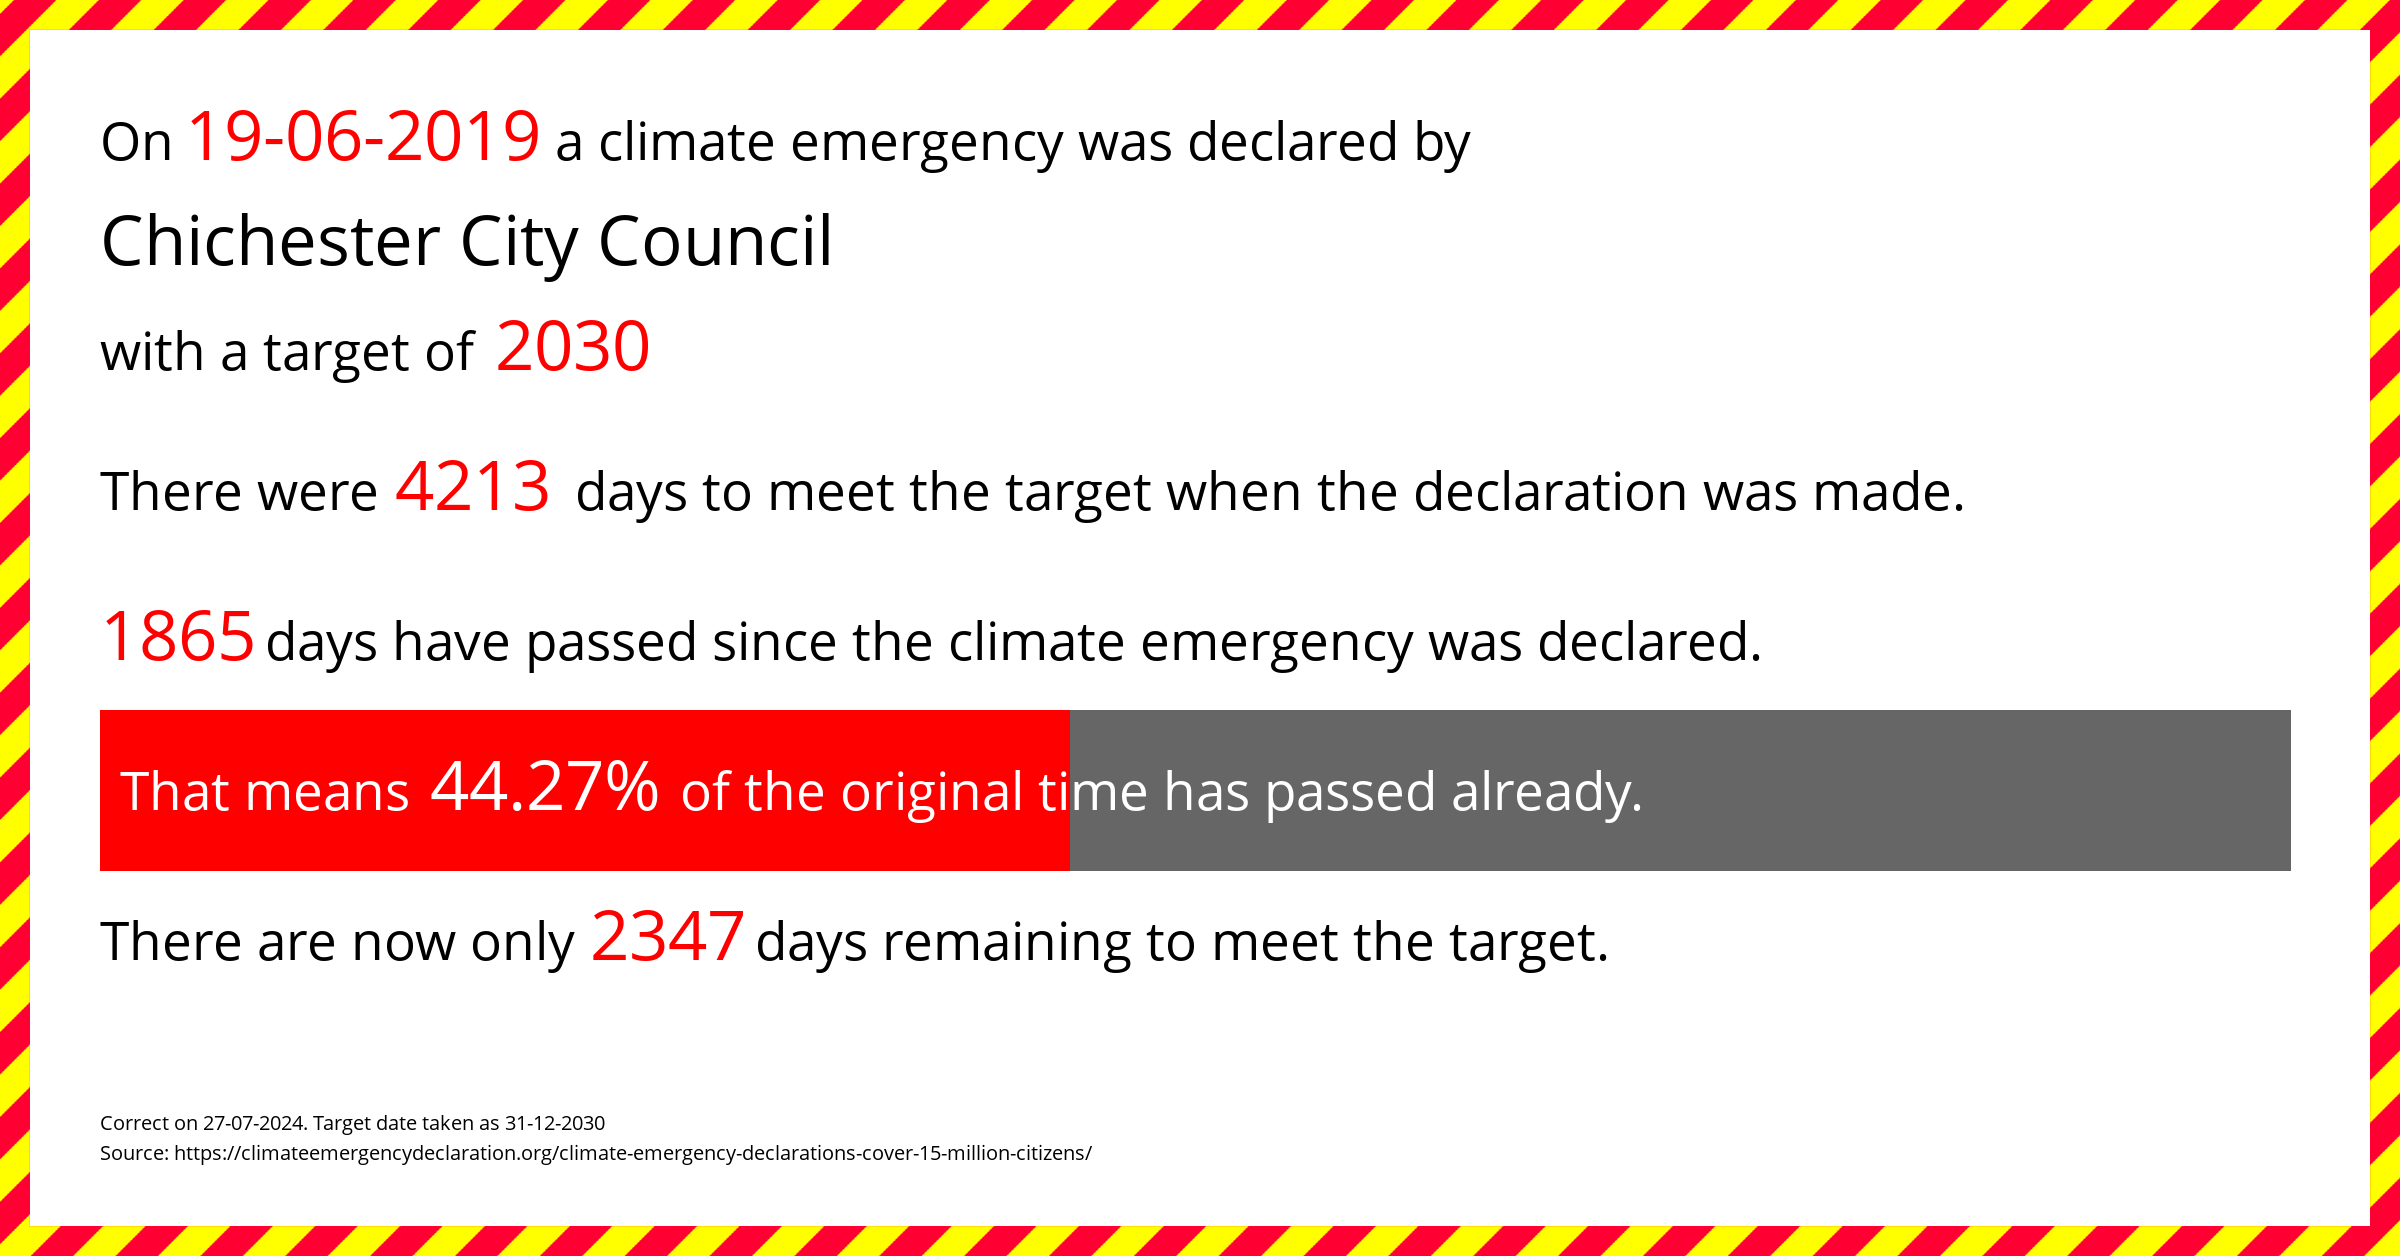 Chichester City Council declared a Climate emergency on Wednesday 19th June 2019, with a target of 2030.